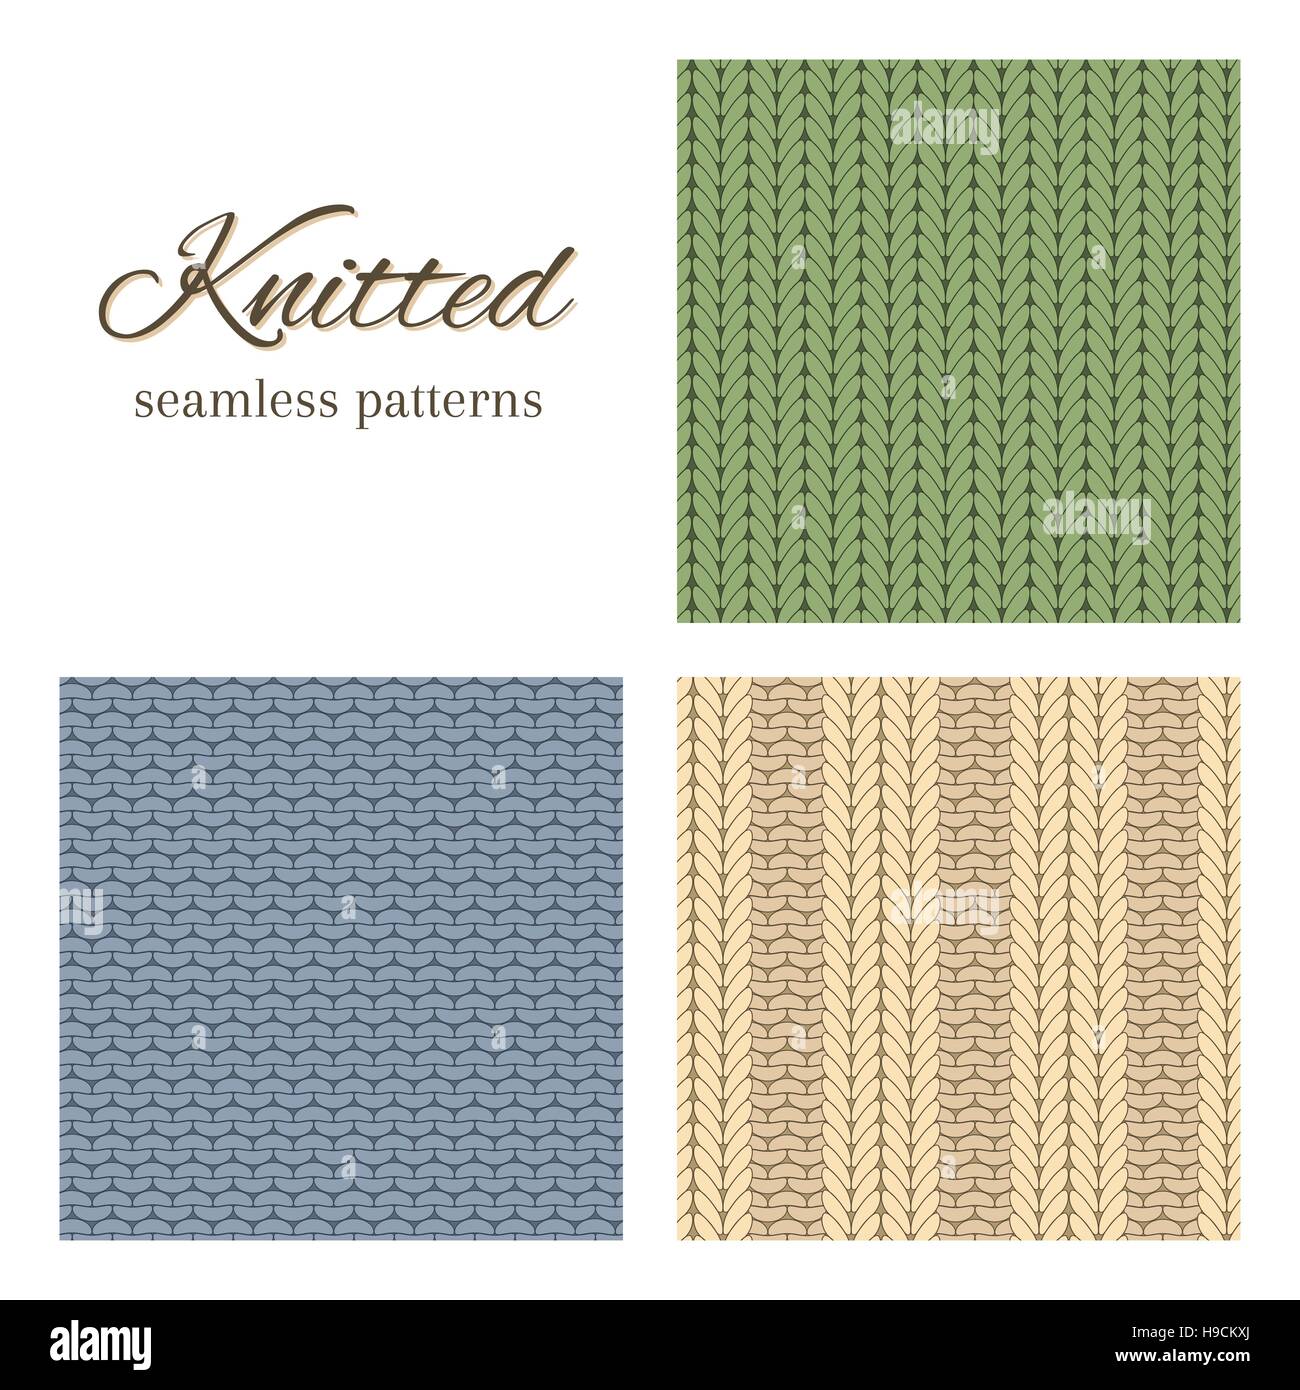 Set of vector seamless patterns imitating basic knitted fabrics: stockinette stitch, garter stitch and ribbing. Abstract vector backgrounds. Stock Vector